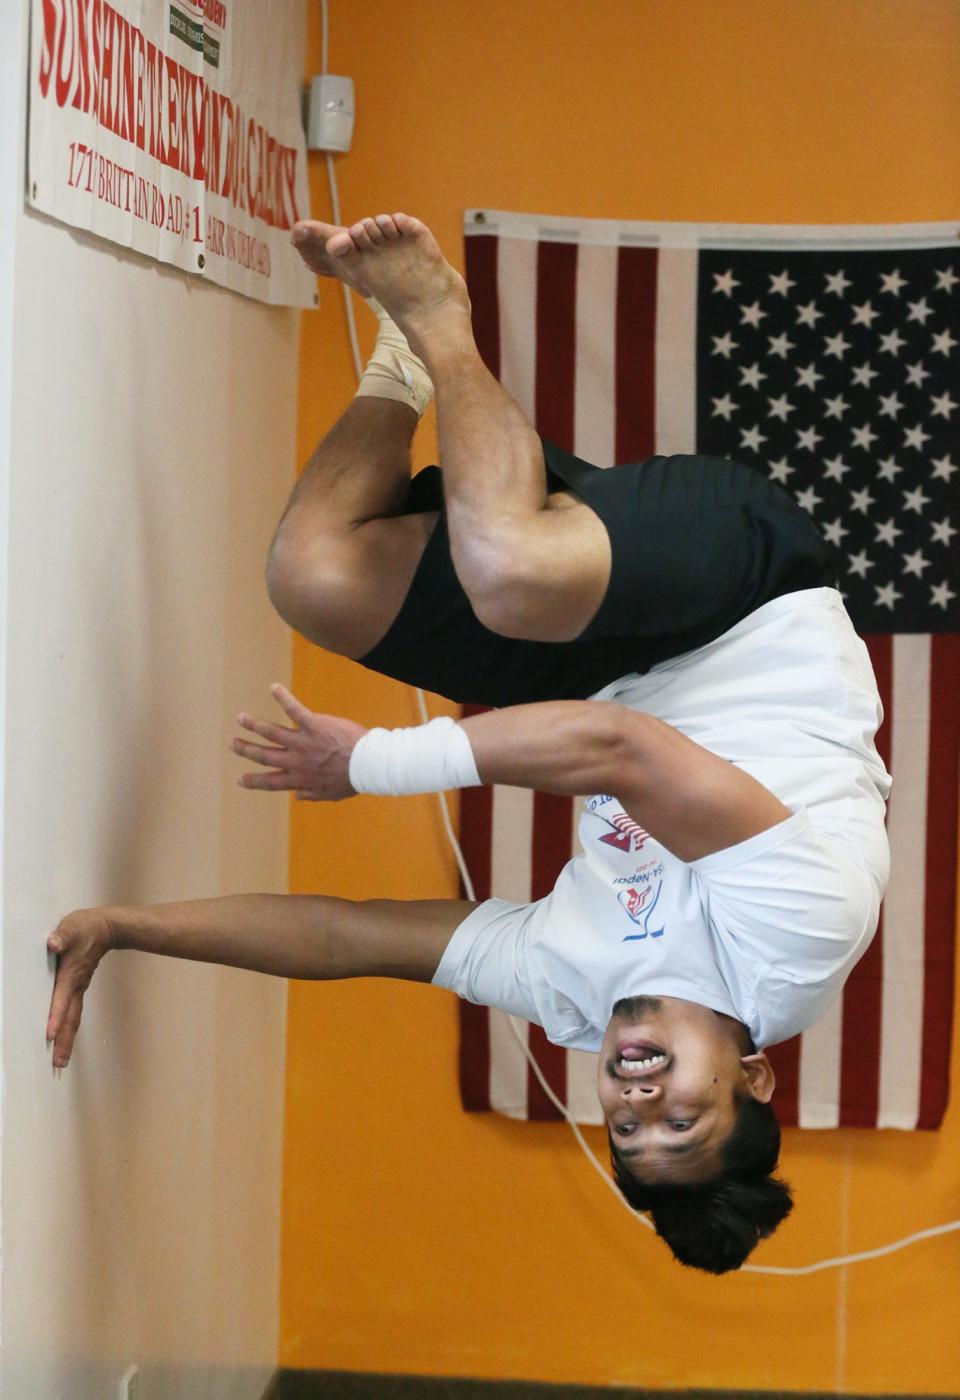 Dinesh Sunar sets a Guinness World Record for the most circular jumps off a wall in one minute Feb. 10 at Sunshine Taekwondo Academy in Akron. Sunar successfully completed 16 circular jumps in just under a minute.